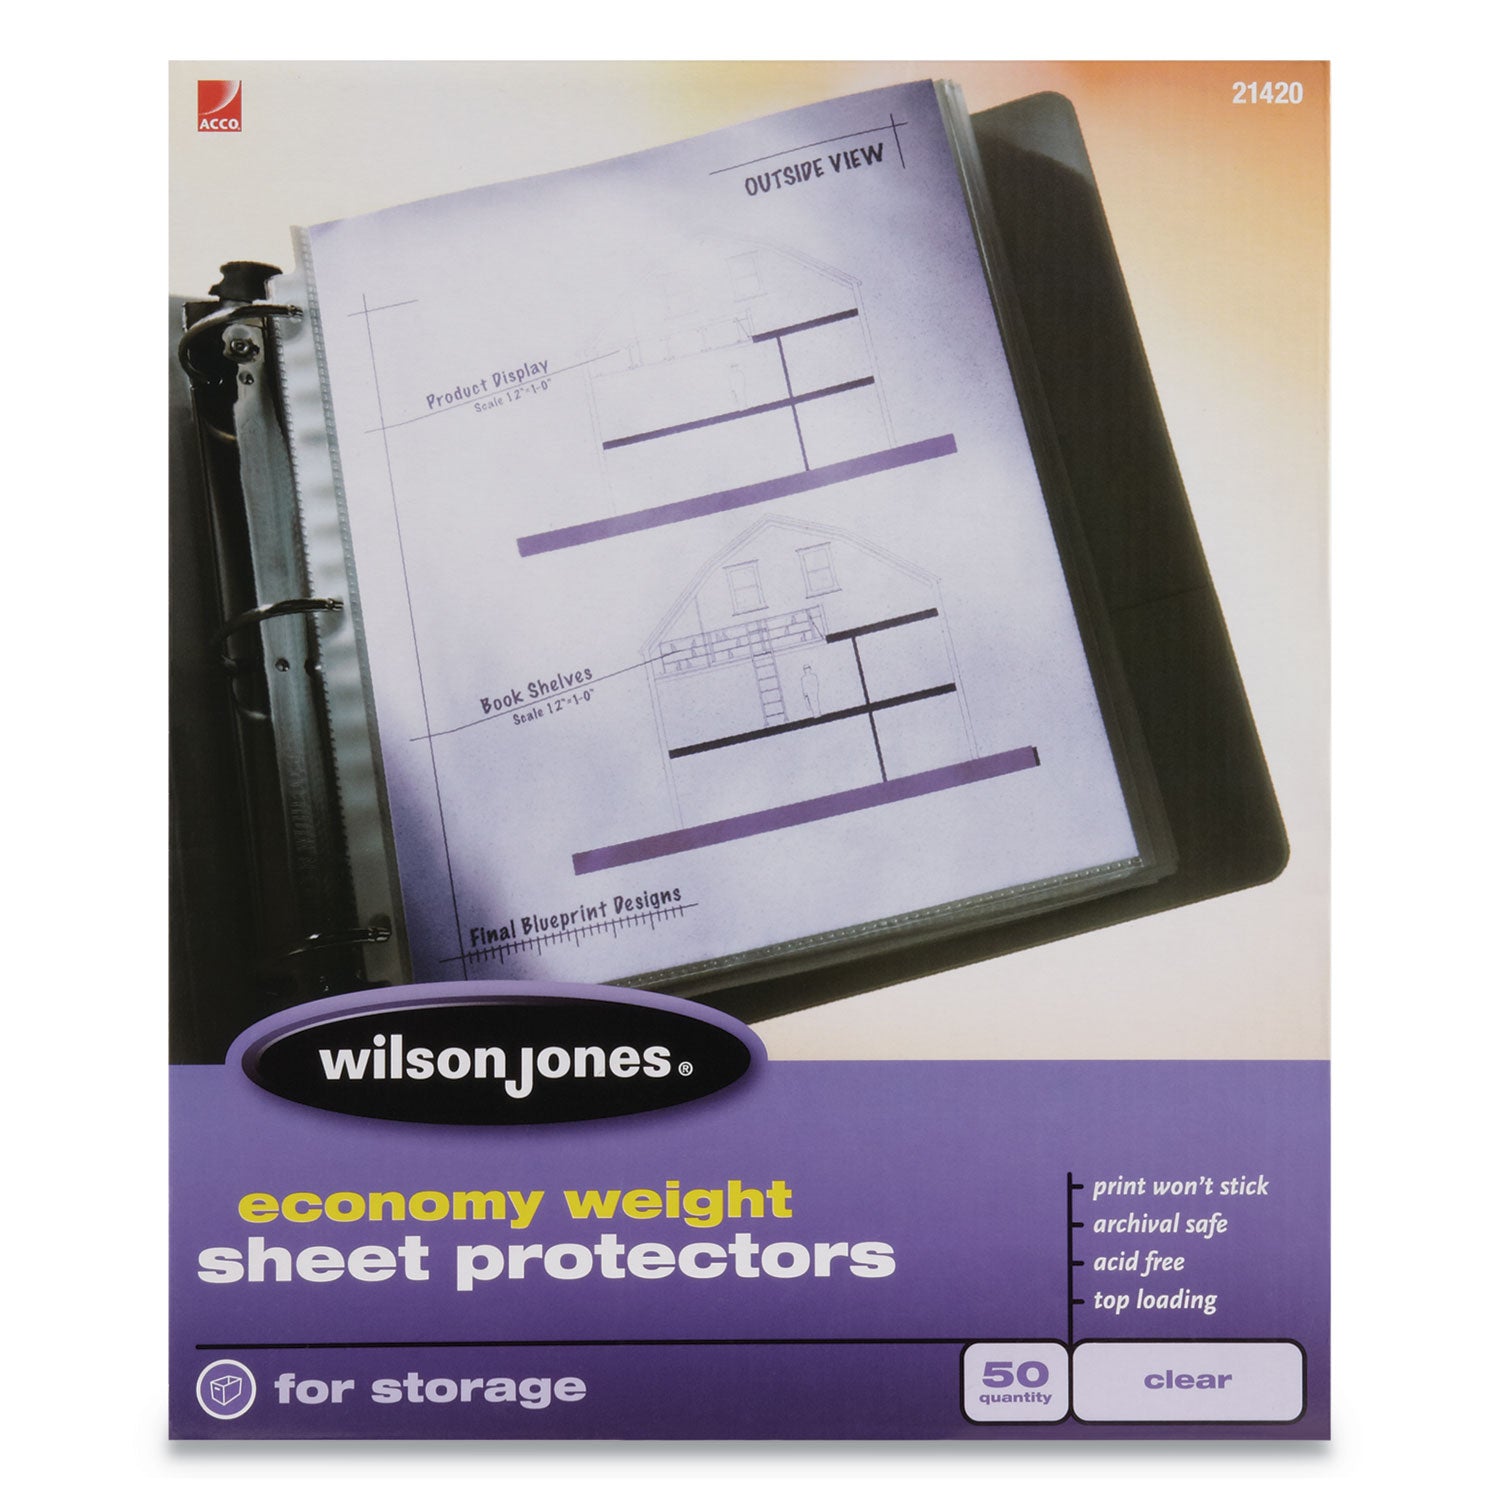 economy-weight-top-loading-sheet-protectors-letter-50-box_wlj21420 - 1